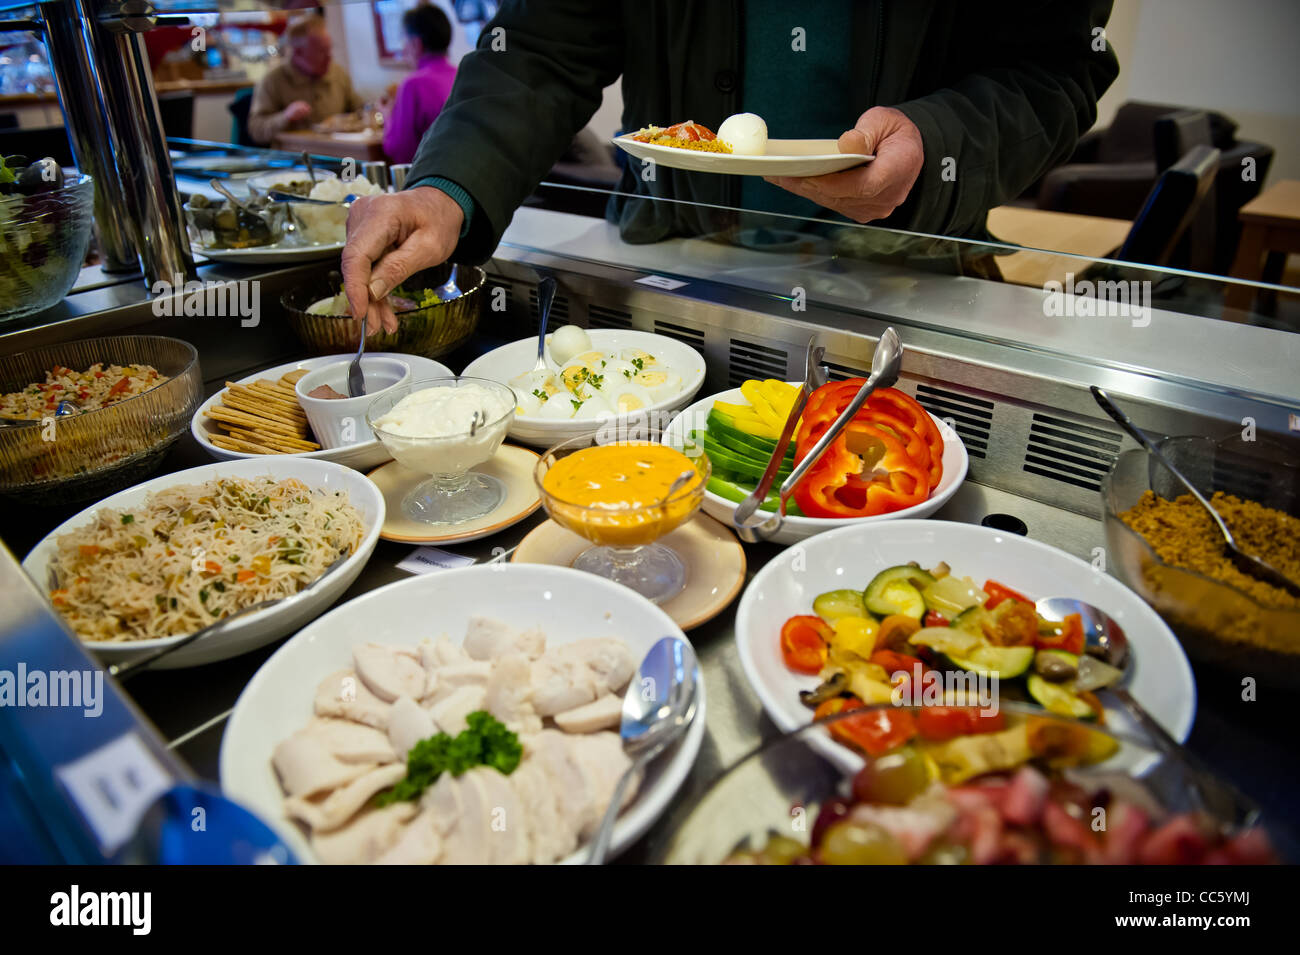 Buffet counter of salad cold meats fruits rice and pasta Stock Photo